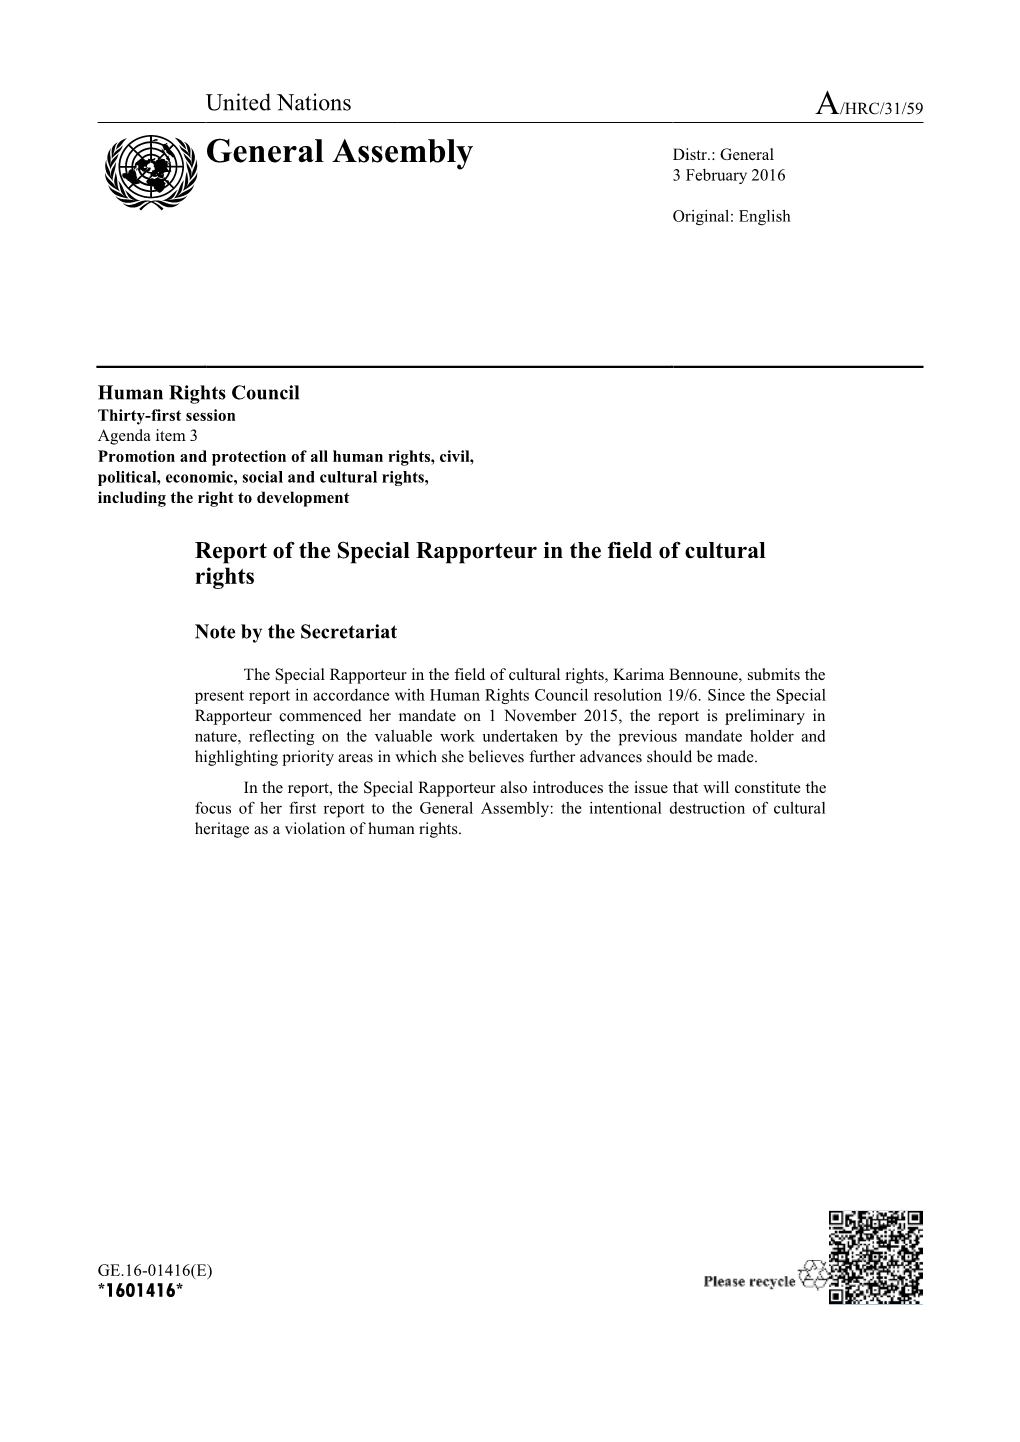 Report of the Special Rapporteur in the Field of Cultural Rights in English